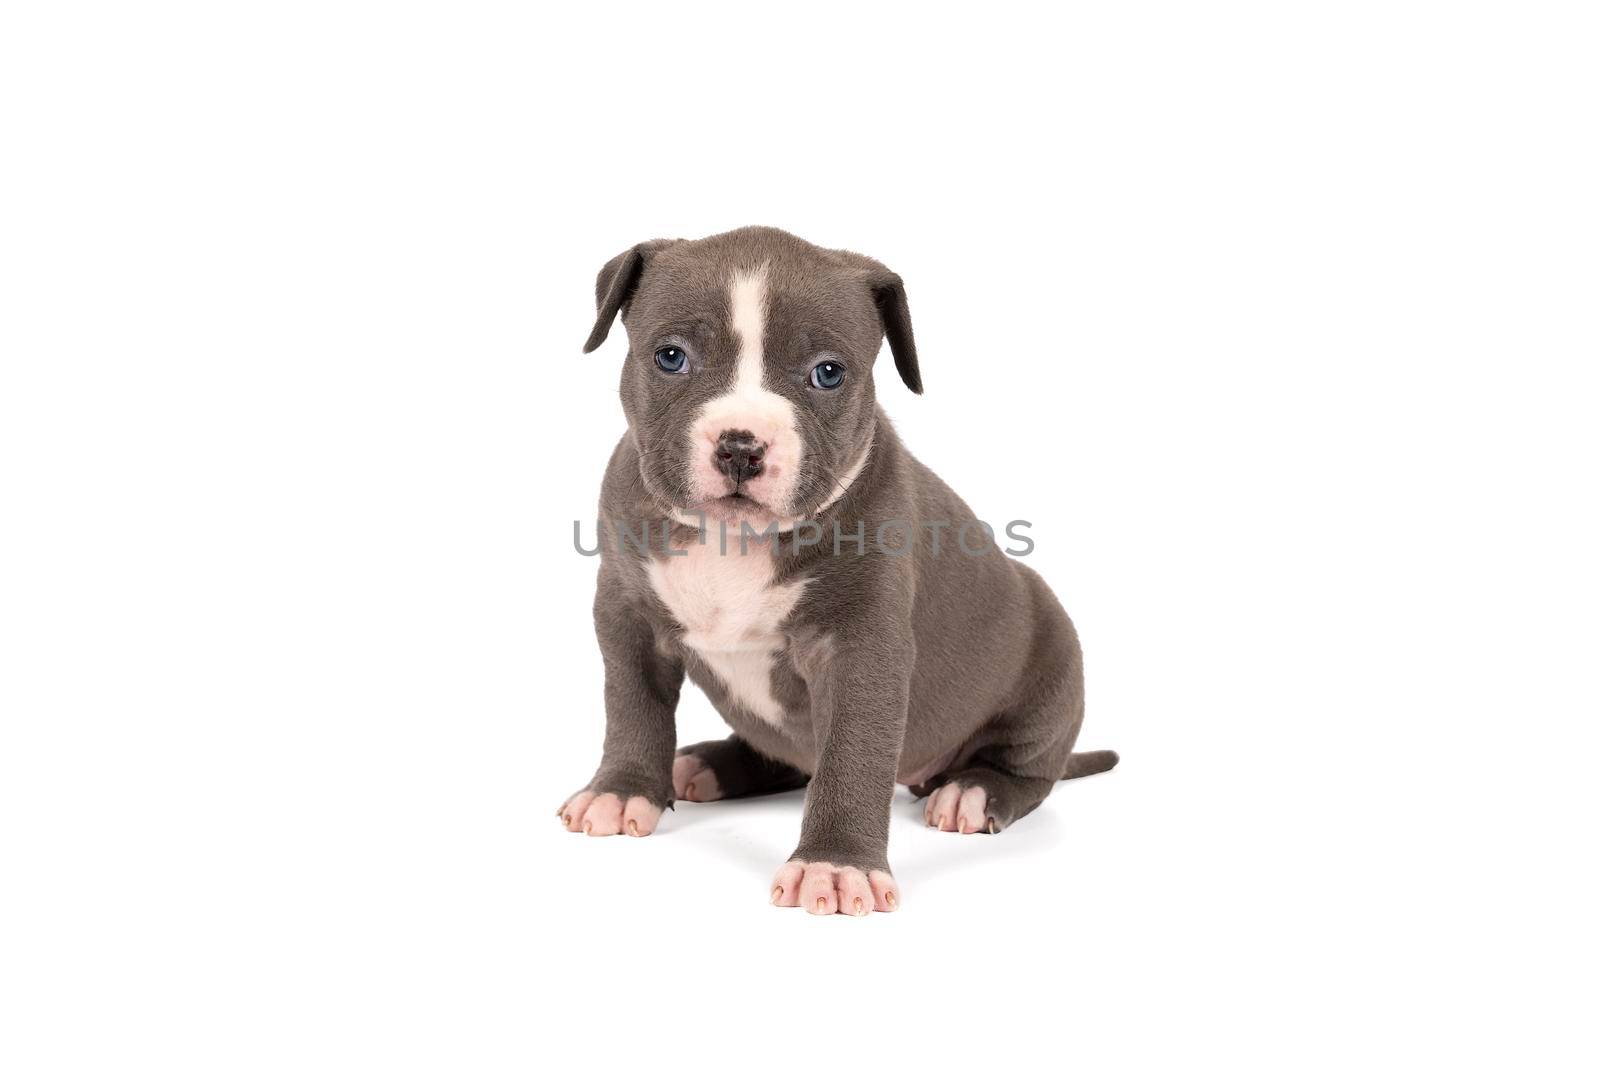 Purebred American Bully or Bulldog pup with blue and white fur sitting looking at the camera isolated on a white background by LeoniekvanderVliet